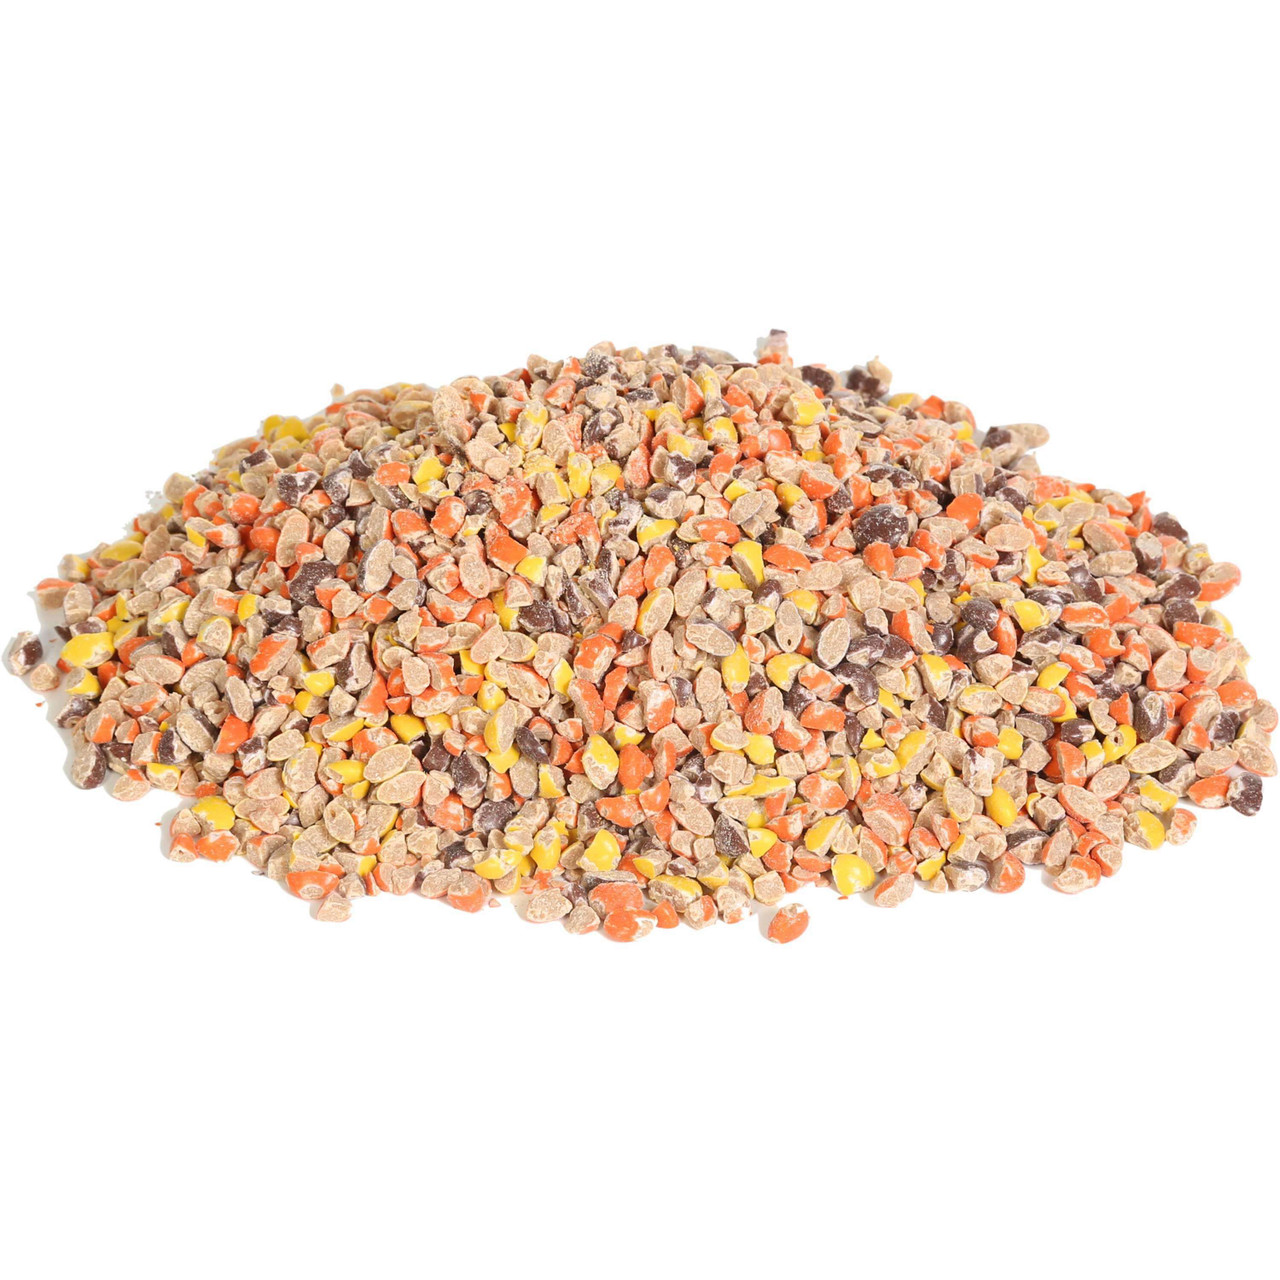 TOPPERS Chopped REESE'S PIECES® Ice Cream Topping - 5 lb | Colorful Crunch - Chicken Pieces